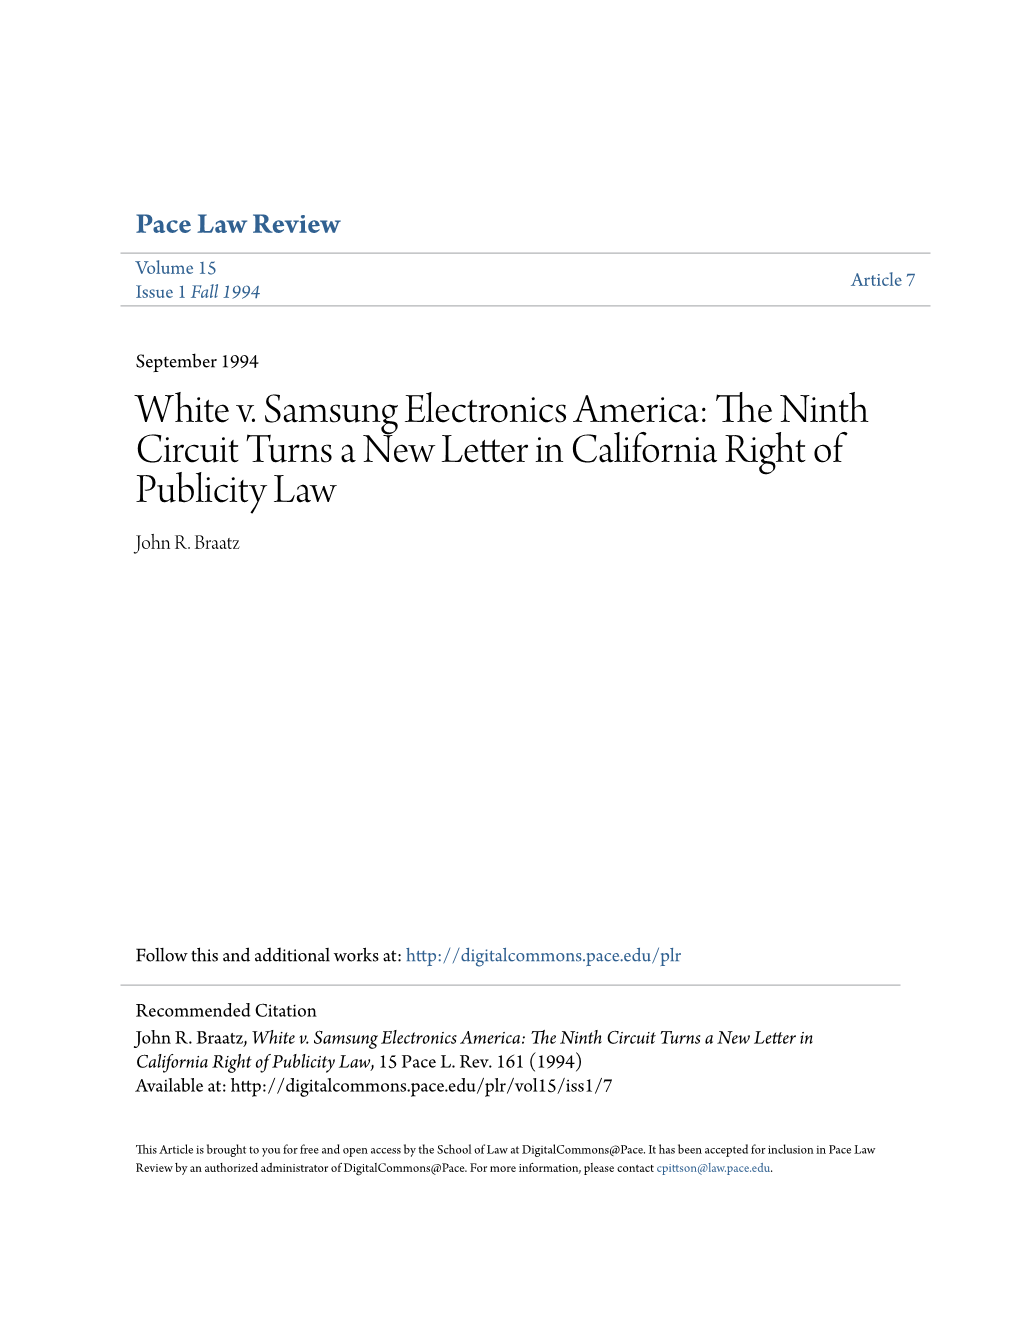 White V. Samsung Electronics America: the Ninth Circuit Turns a New Letter in California Right of Publicity Law, 15 Pace L